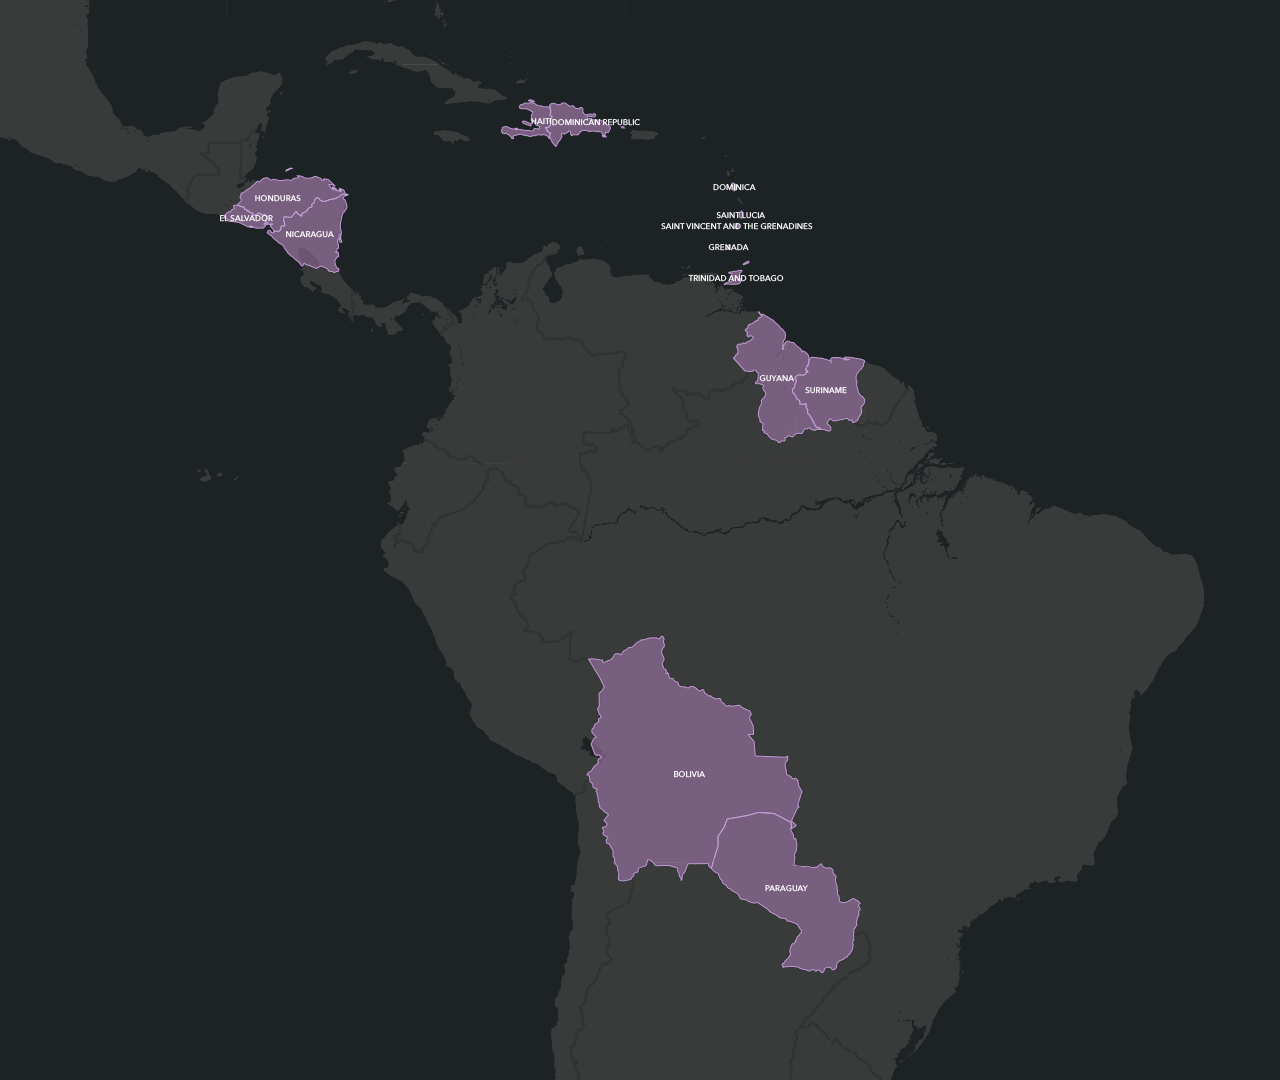 Map of the Americas and Caribbean in dull lavender on a dark gray background with countries outlined and labeled in white